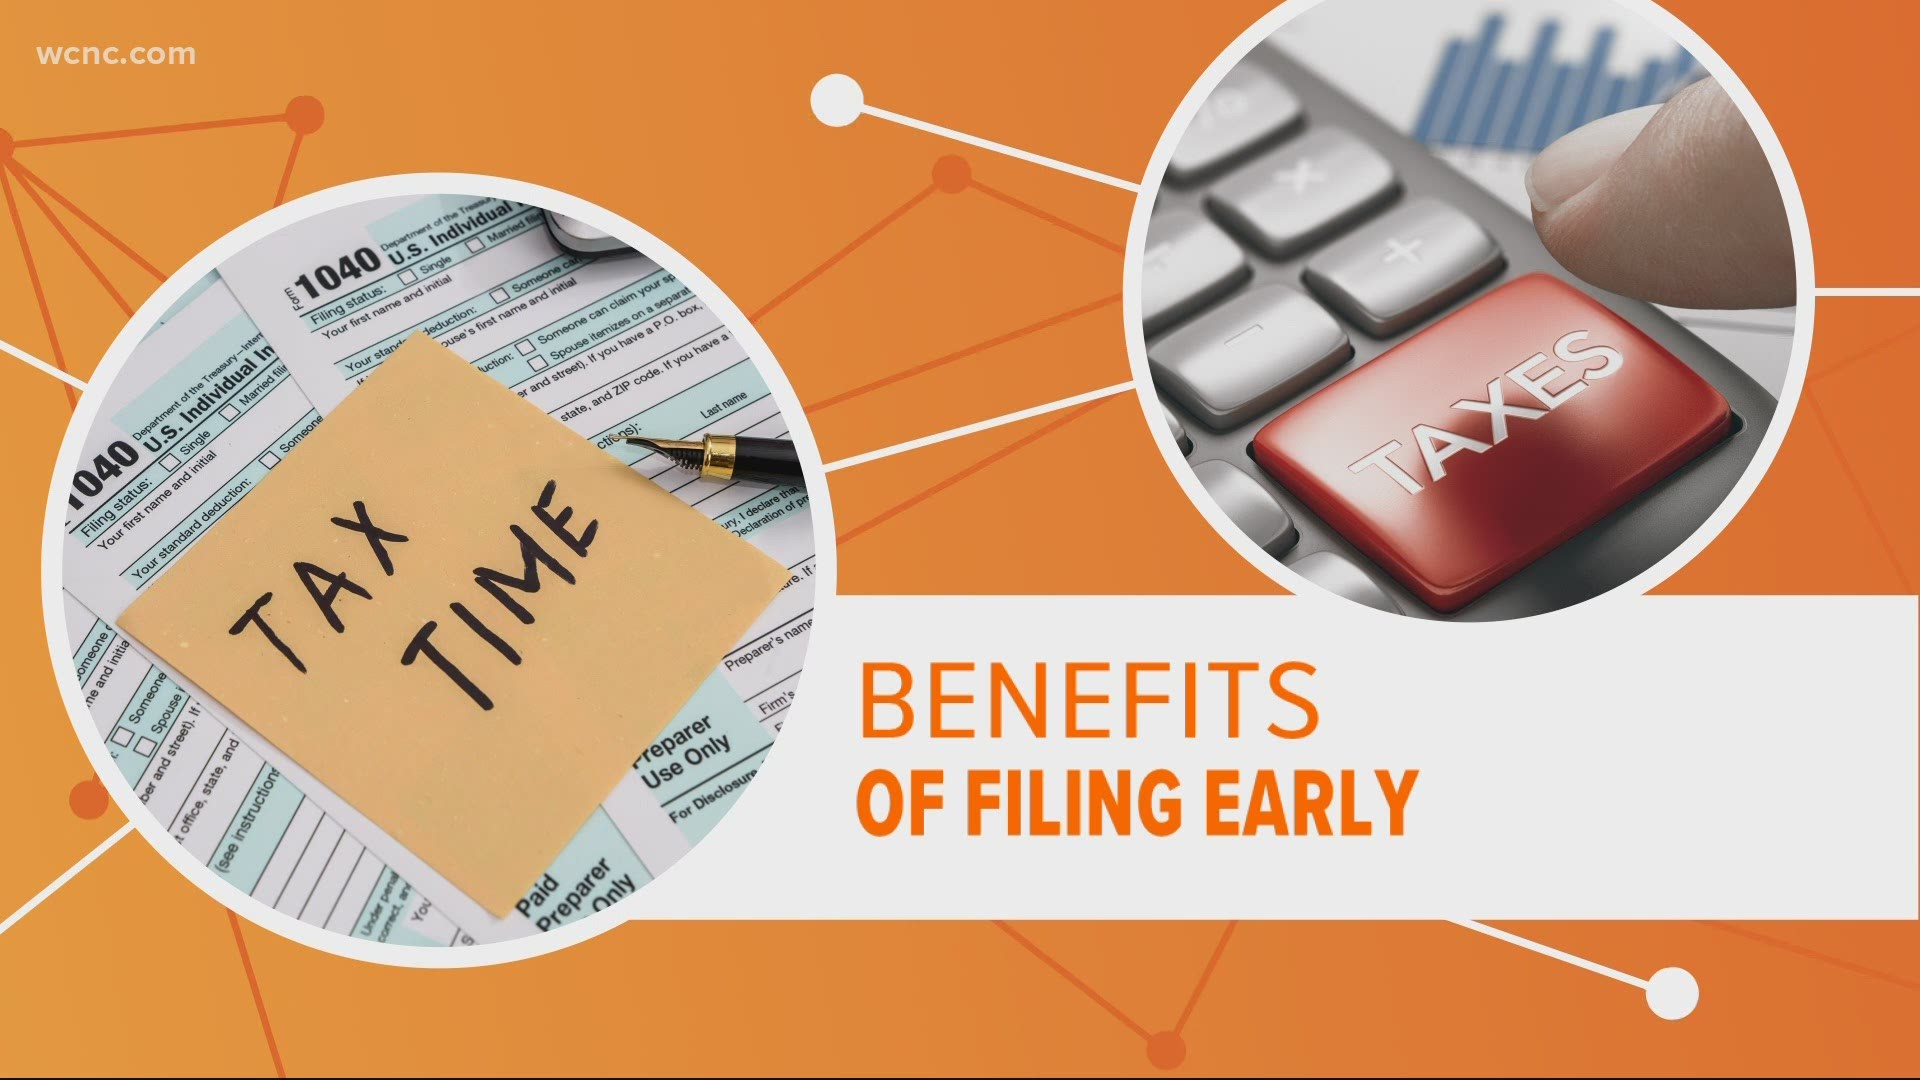 Tax season officially begins Friday, and experts say it's even more important to file early than ever before.